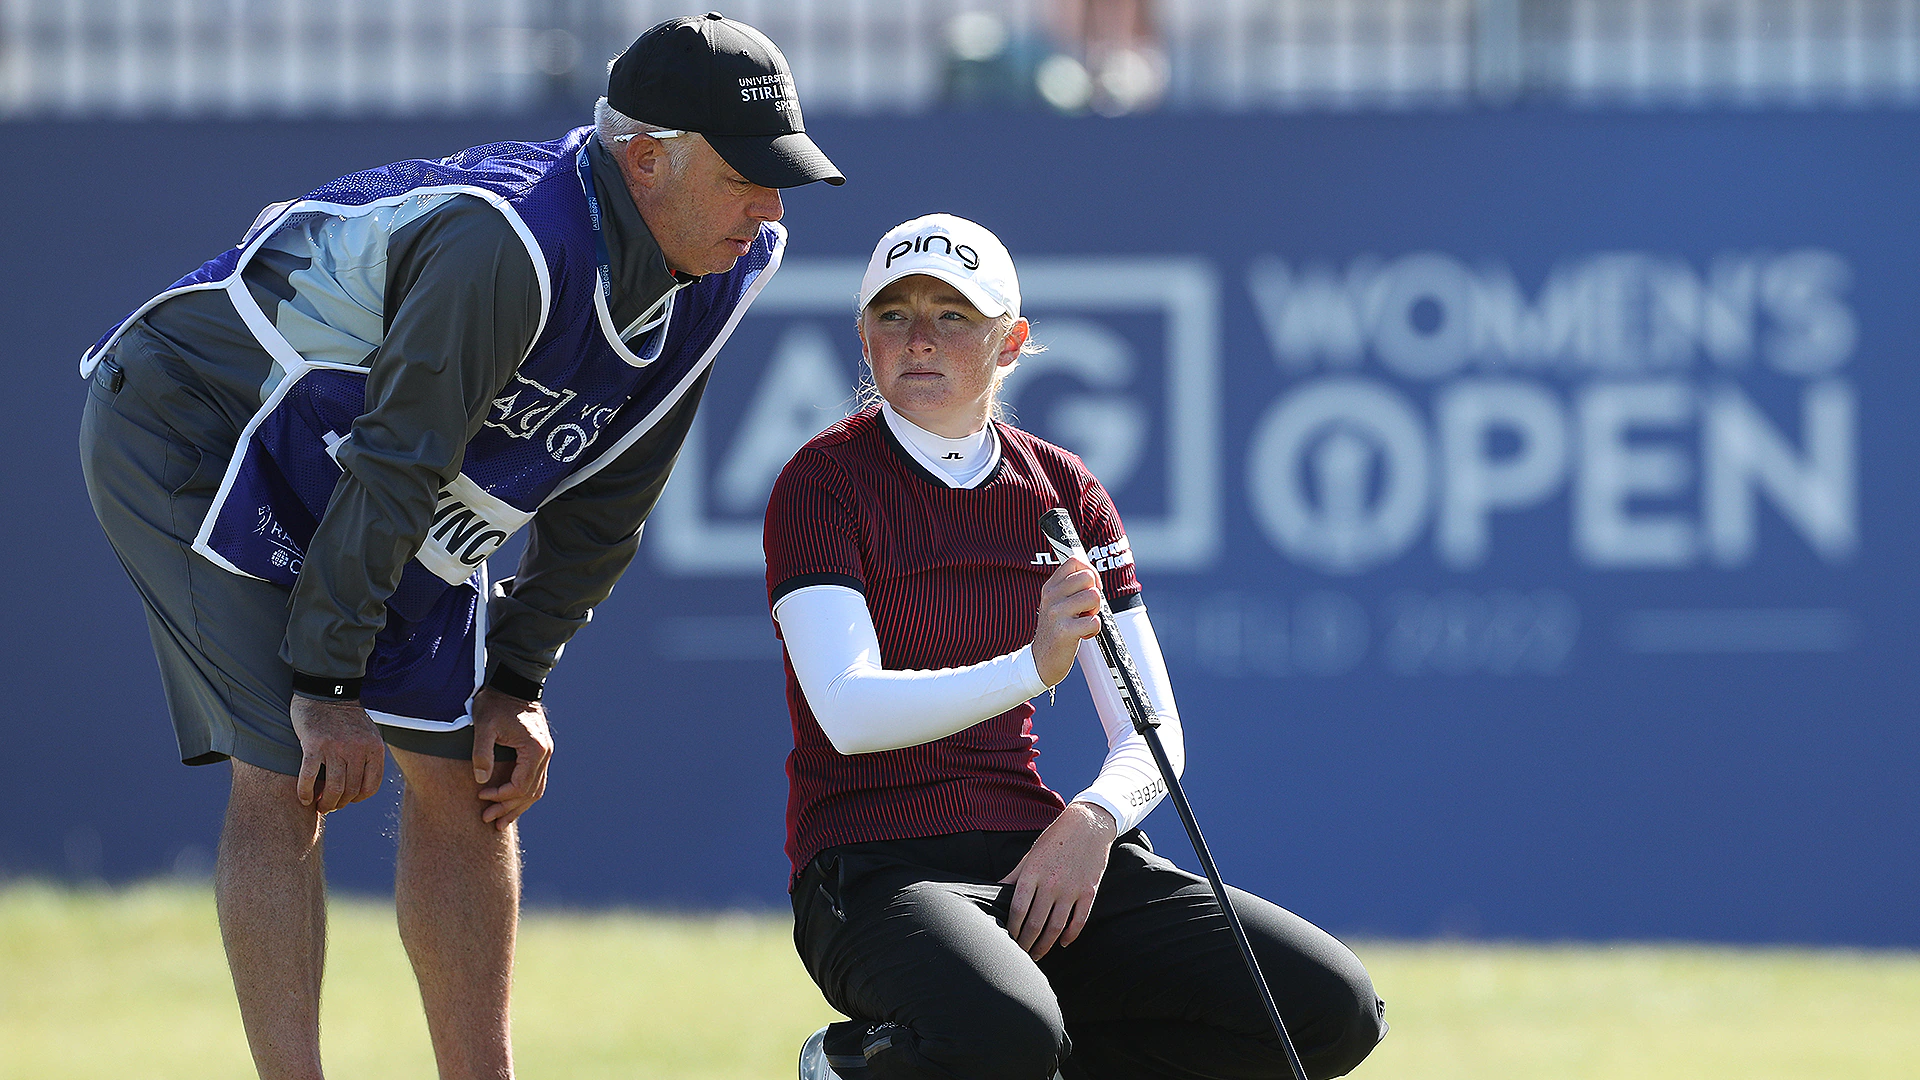 In second start as a pro, Scotland’s Louise Duncan again in AIG Women’s Open mix